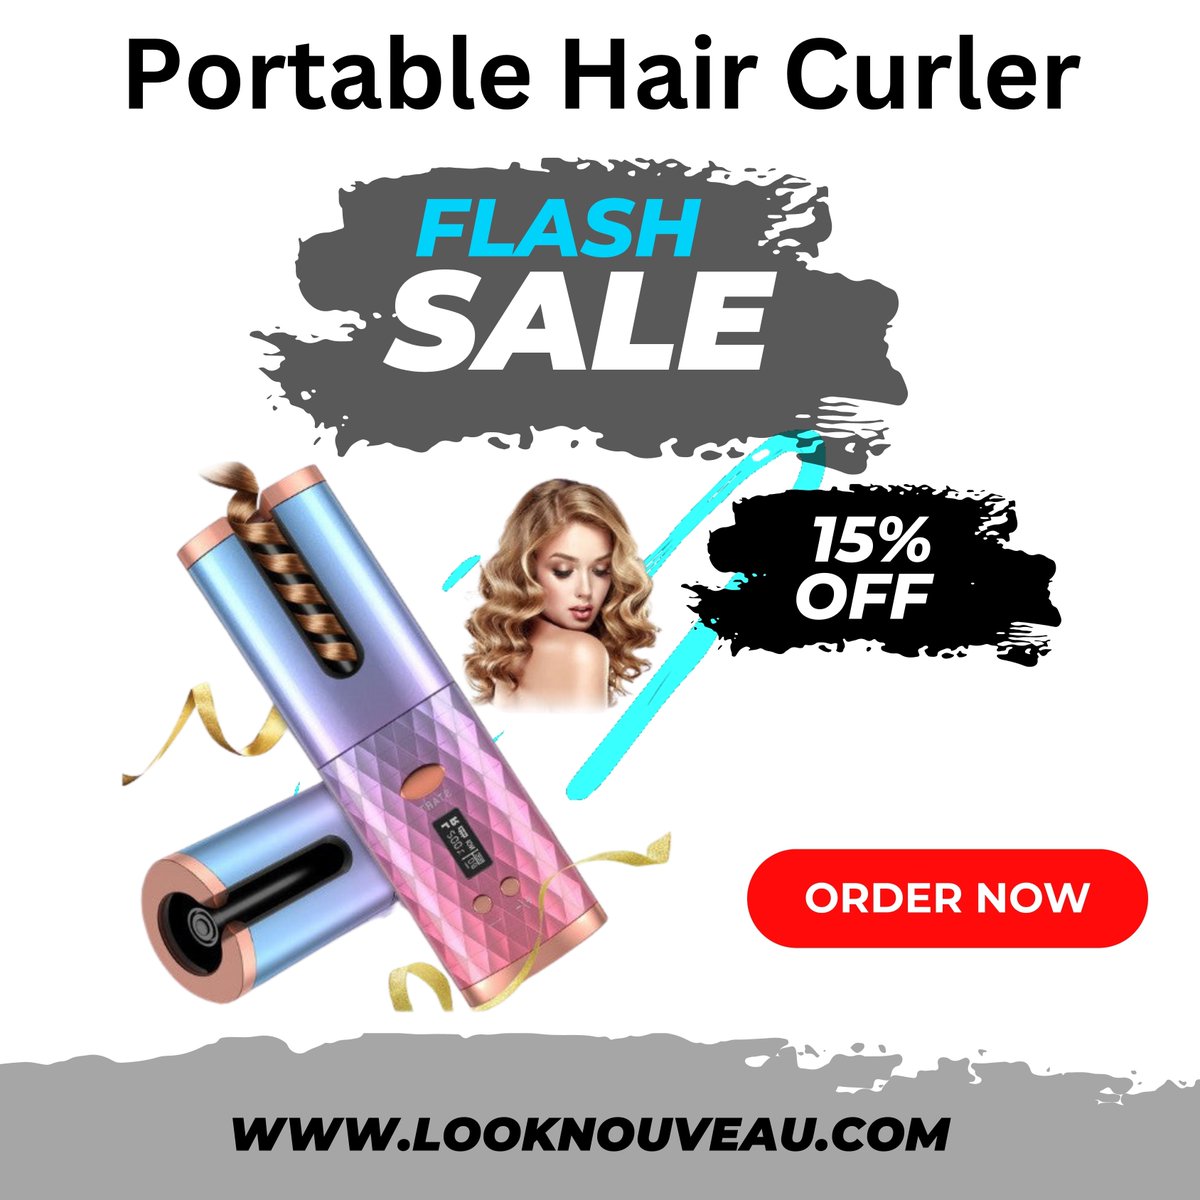 Hair Curling Cordless Hair Curler - Automatic Curling Wand haircurler #cordlesshaircurler #automatichaircurler #hair #CordlessHairCurler #haircurlers #cordlesshaircurler #haircurler #hairstyle#pengeritingrambut #hair #curle #beautifulsboutique #cordlesshaircurler